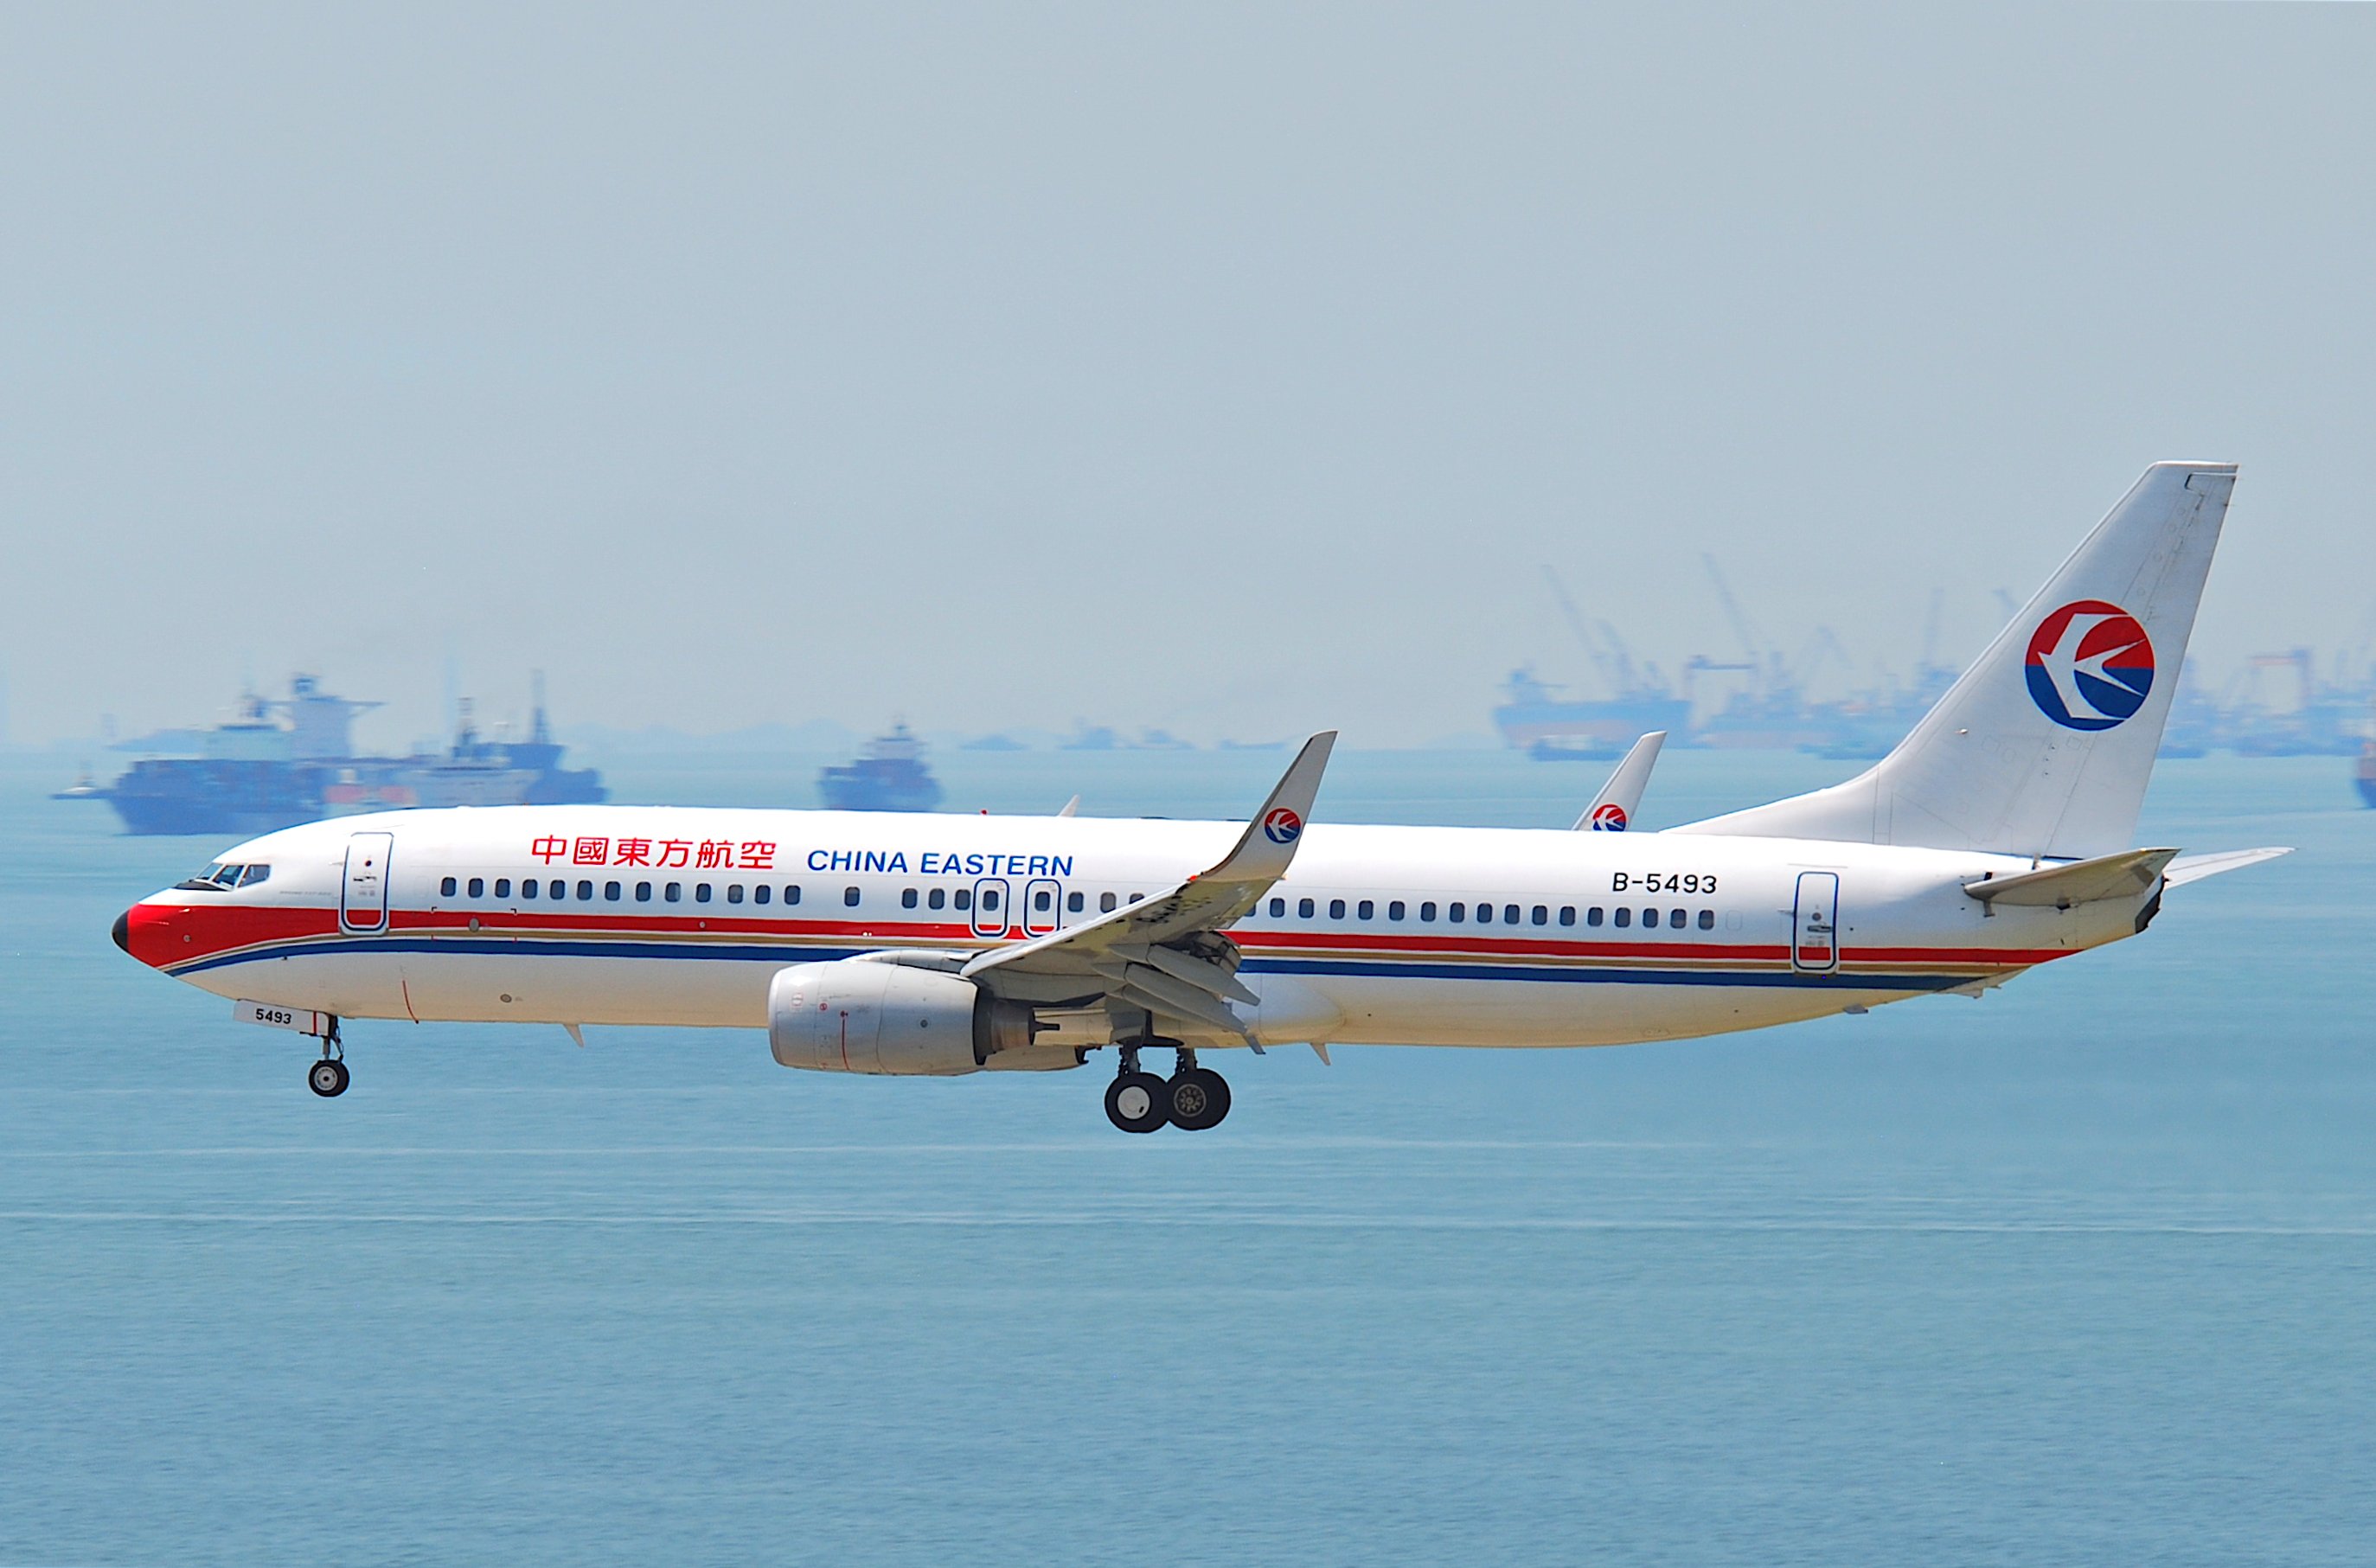 xiamen-airlease-purchase-and-lease-back-of-28-aircraft-with-china